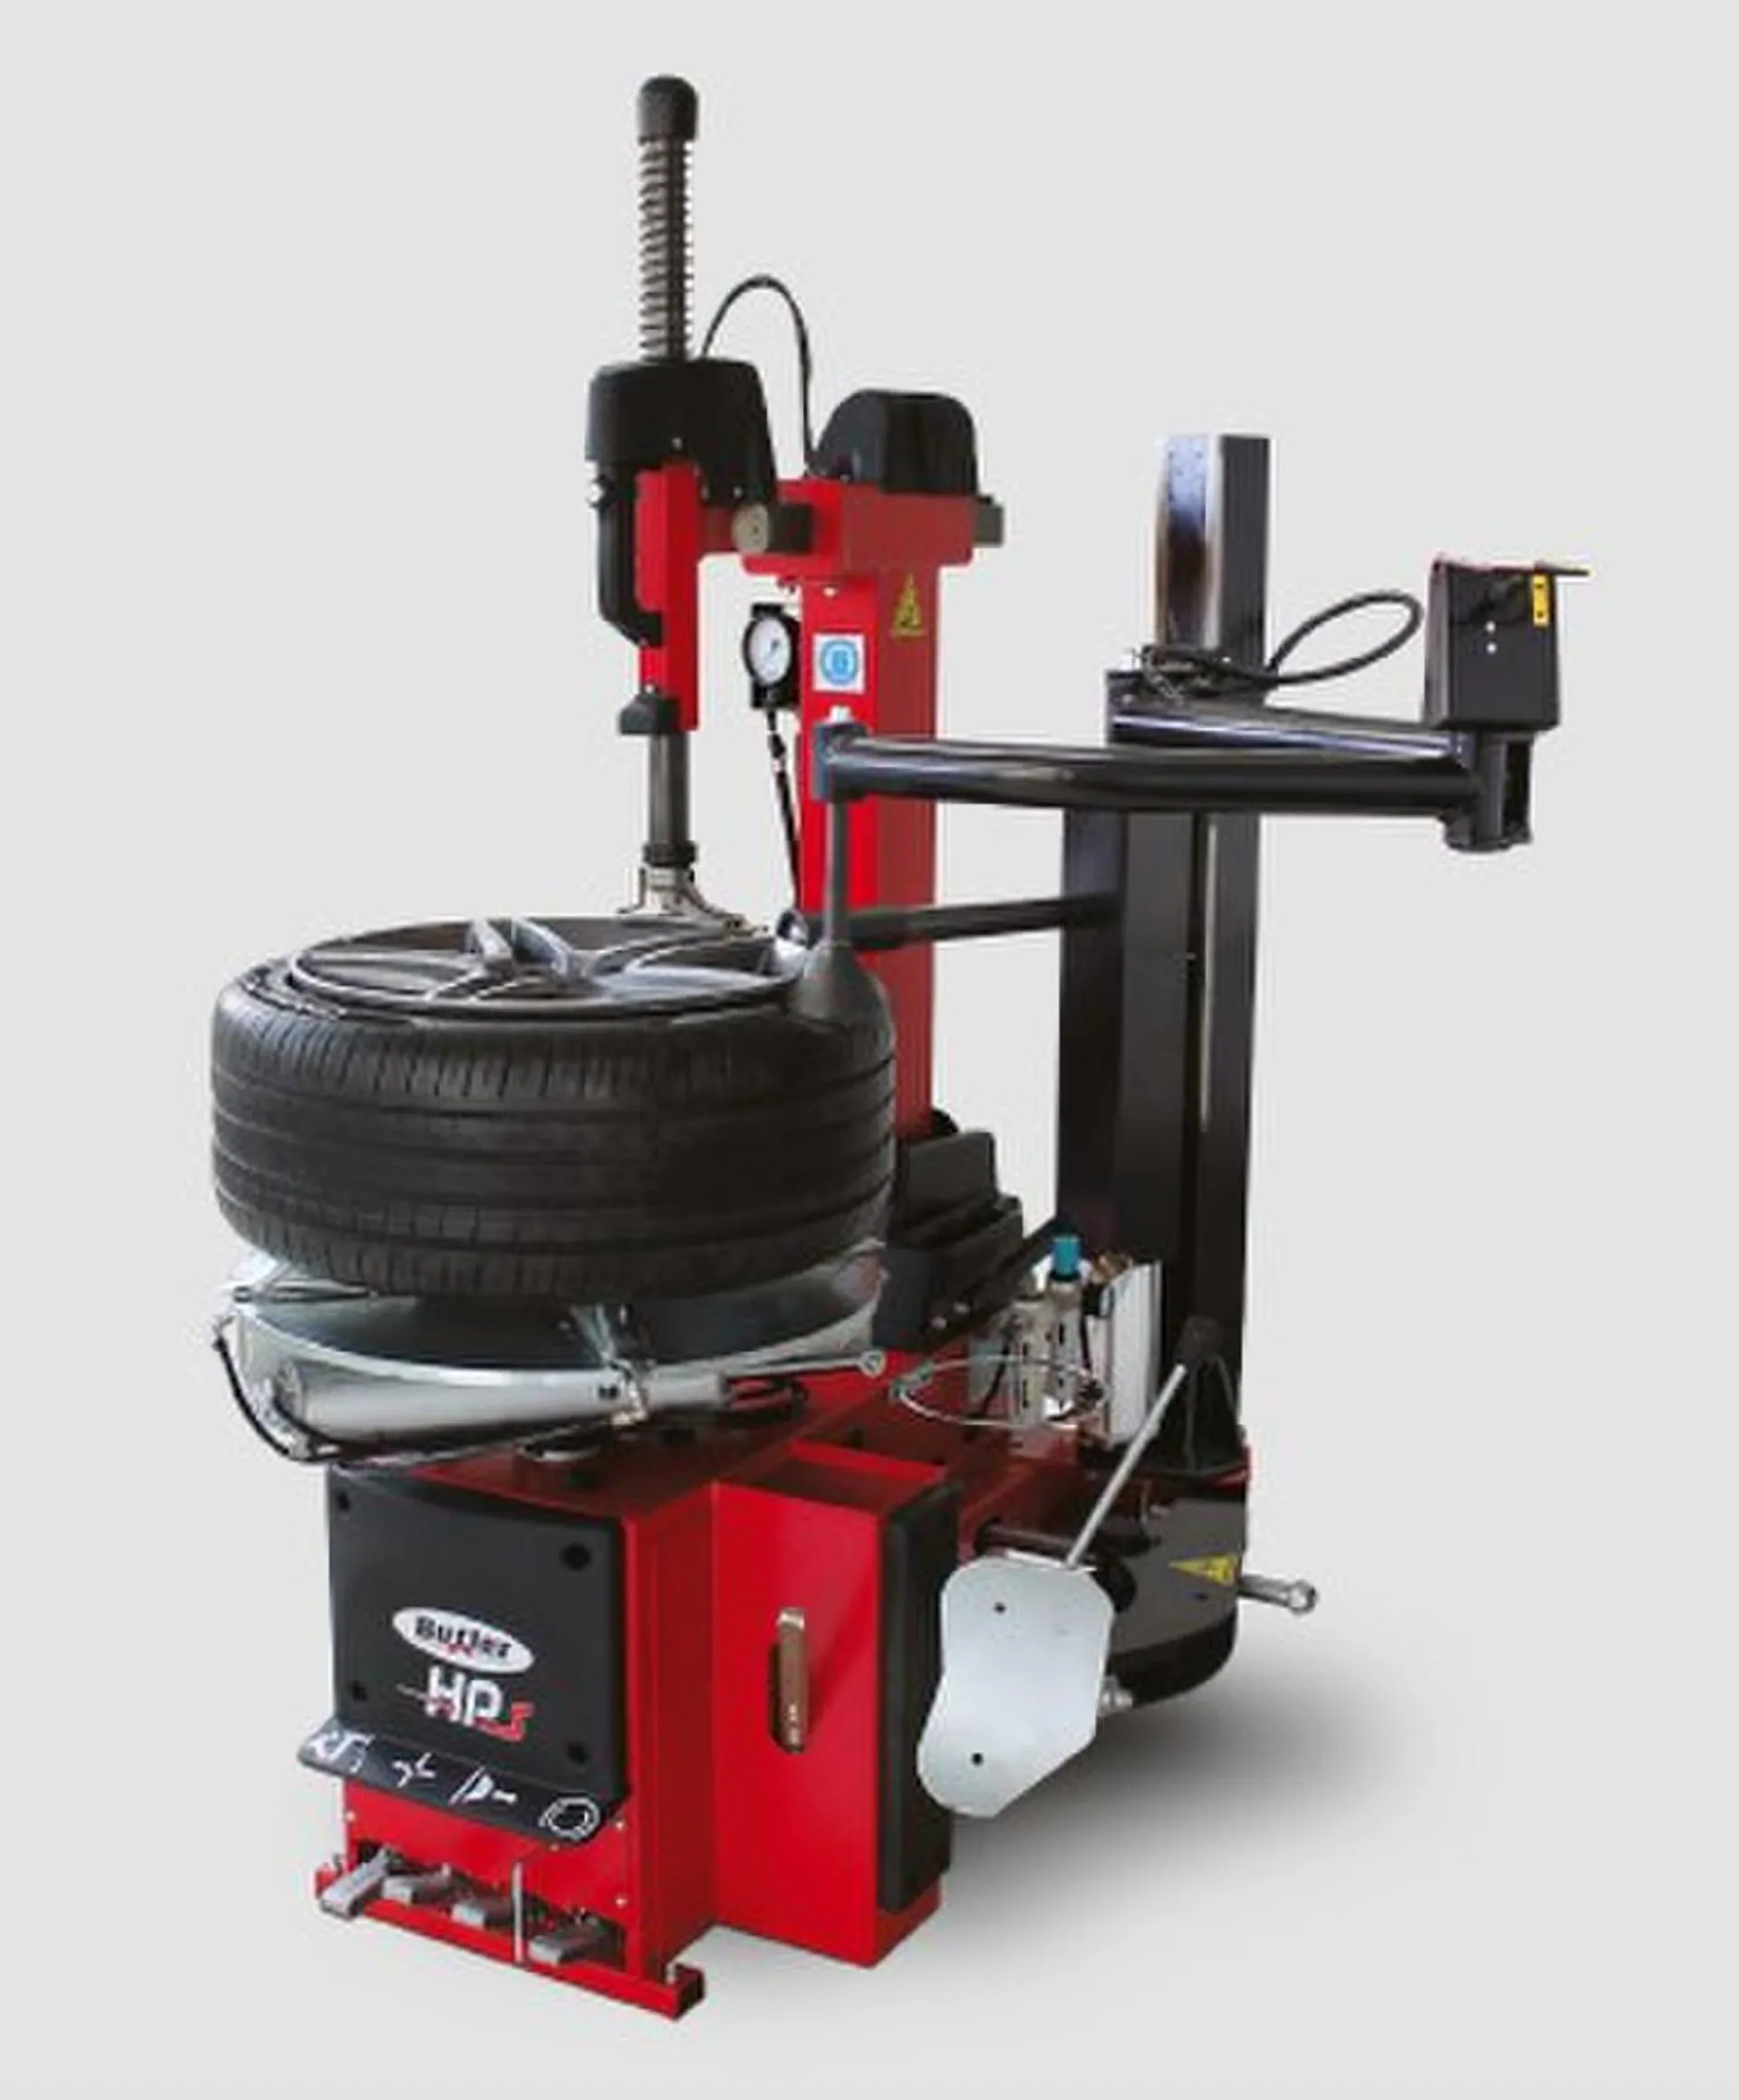 BUTLER HP641SD24FIPLUS83 PROFESSIONAL TYRE CHANGER WITH HELPER ARM